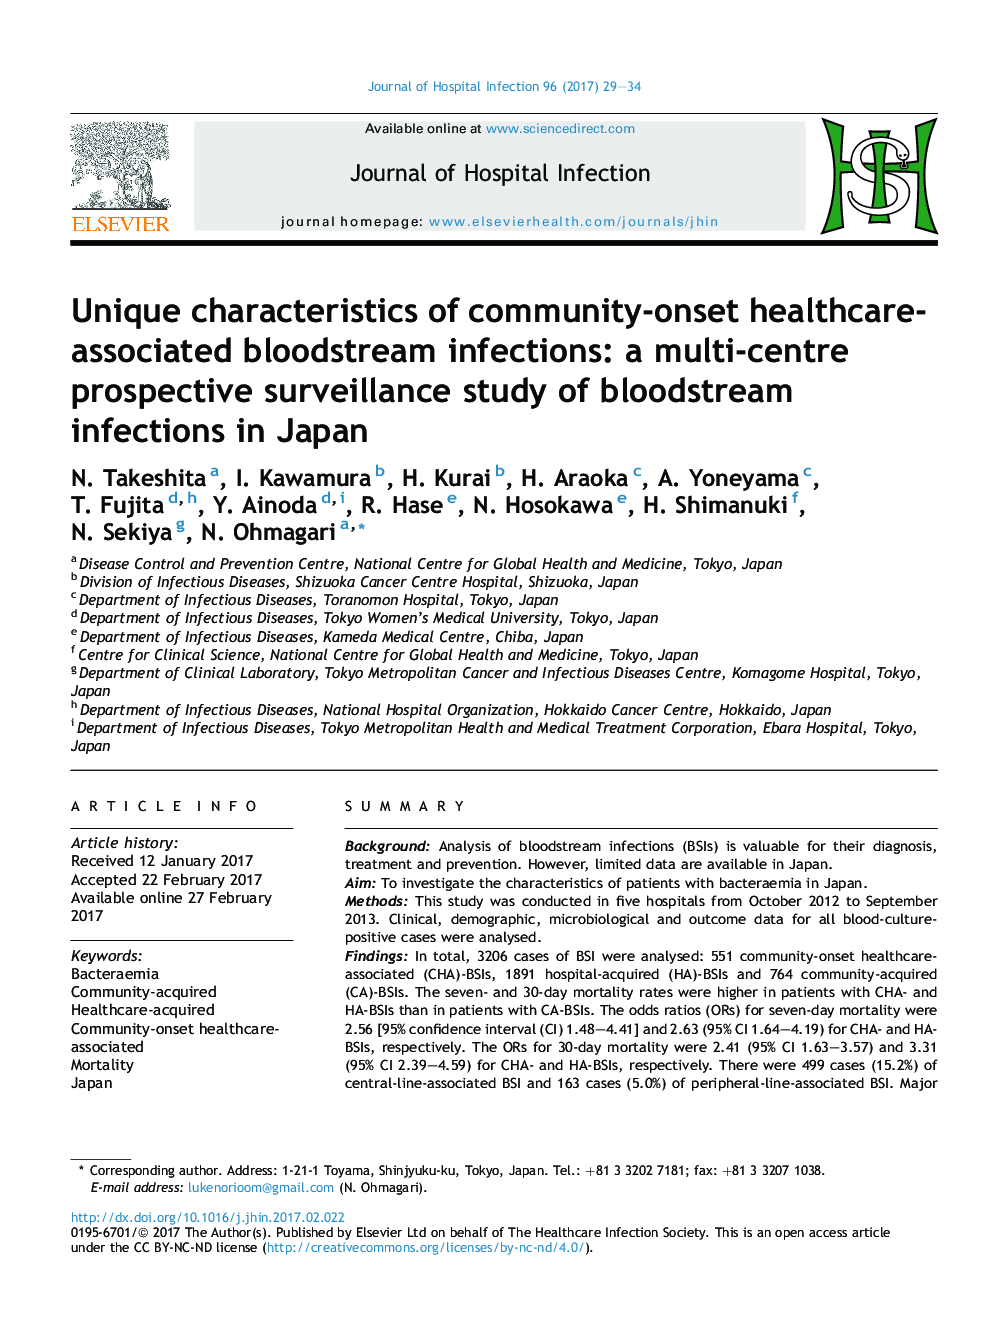 Unique characteristics of community-onset healthcare- associated bloodstream infections: a multi-centre prospective surveillance study of bloodstream infections in Japan